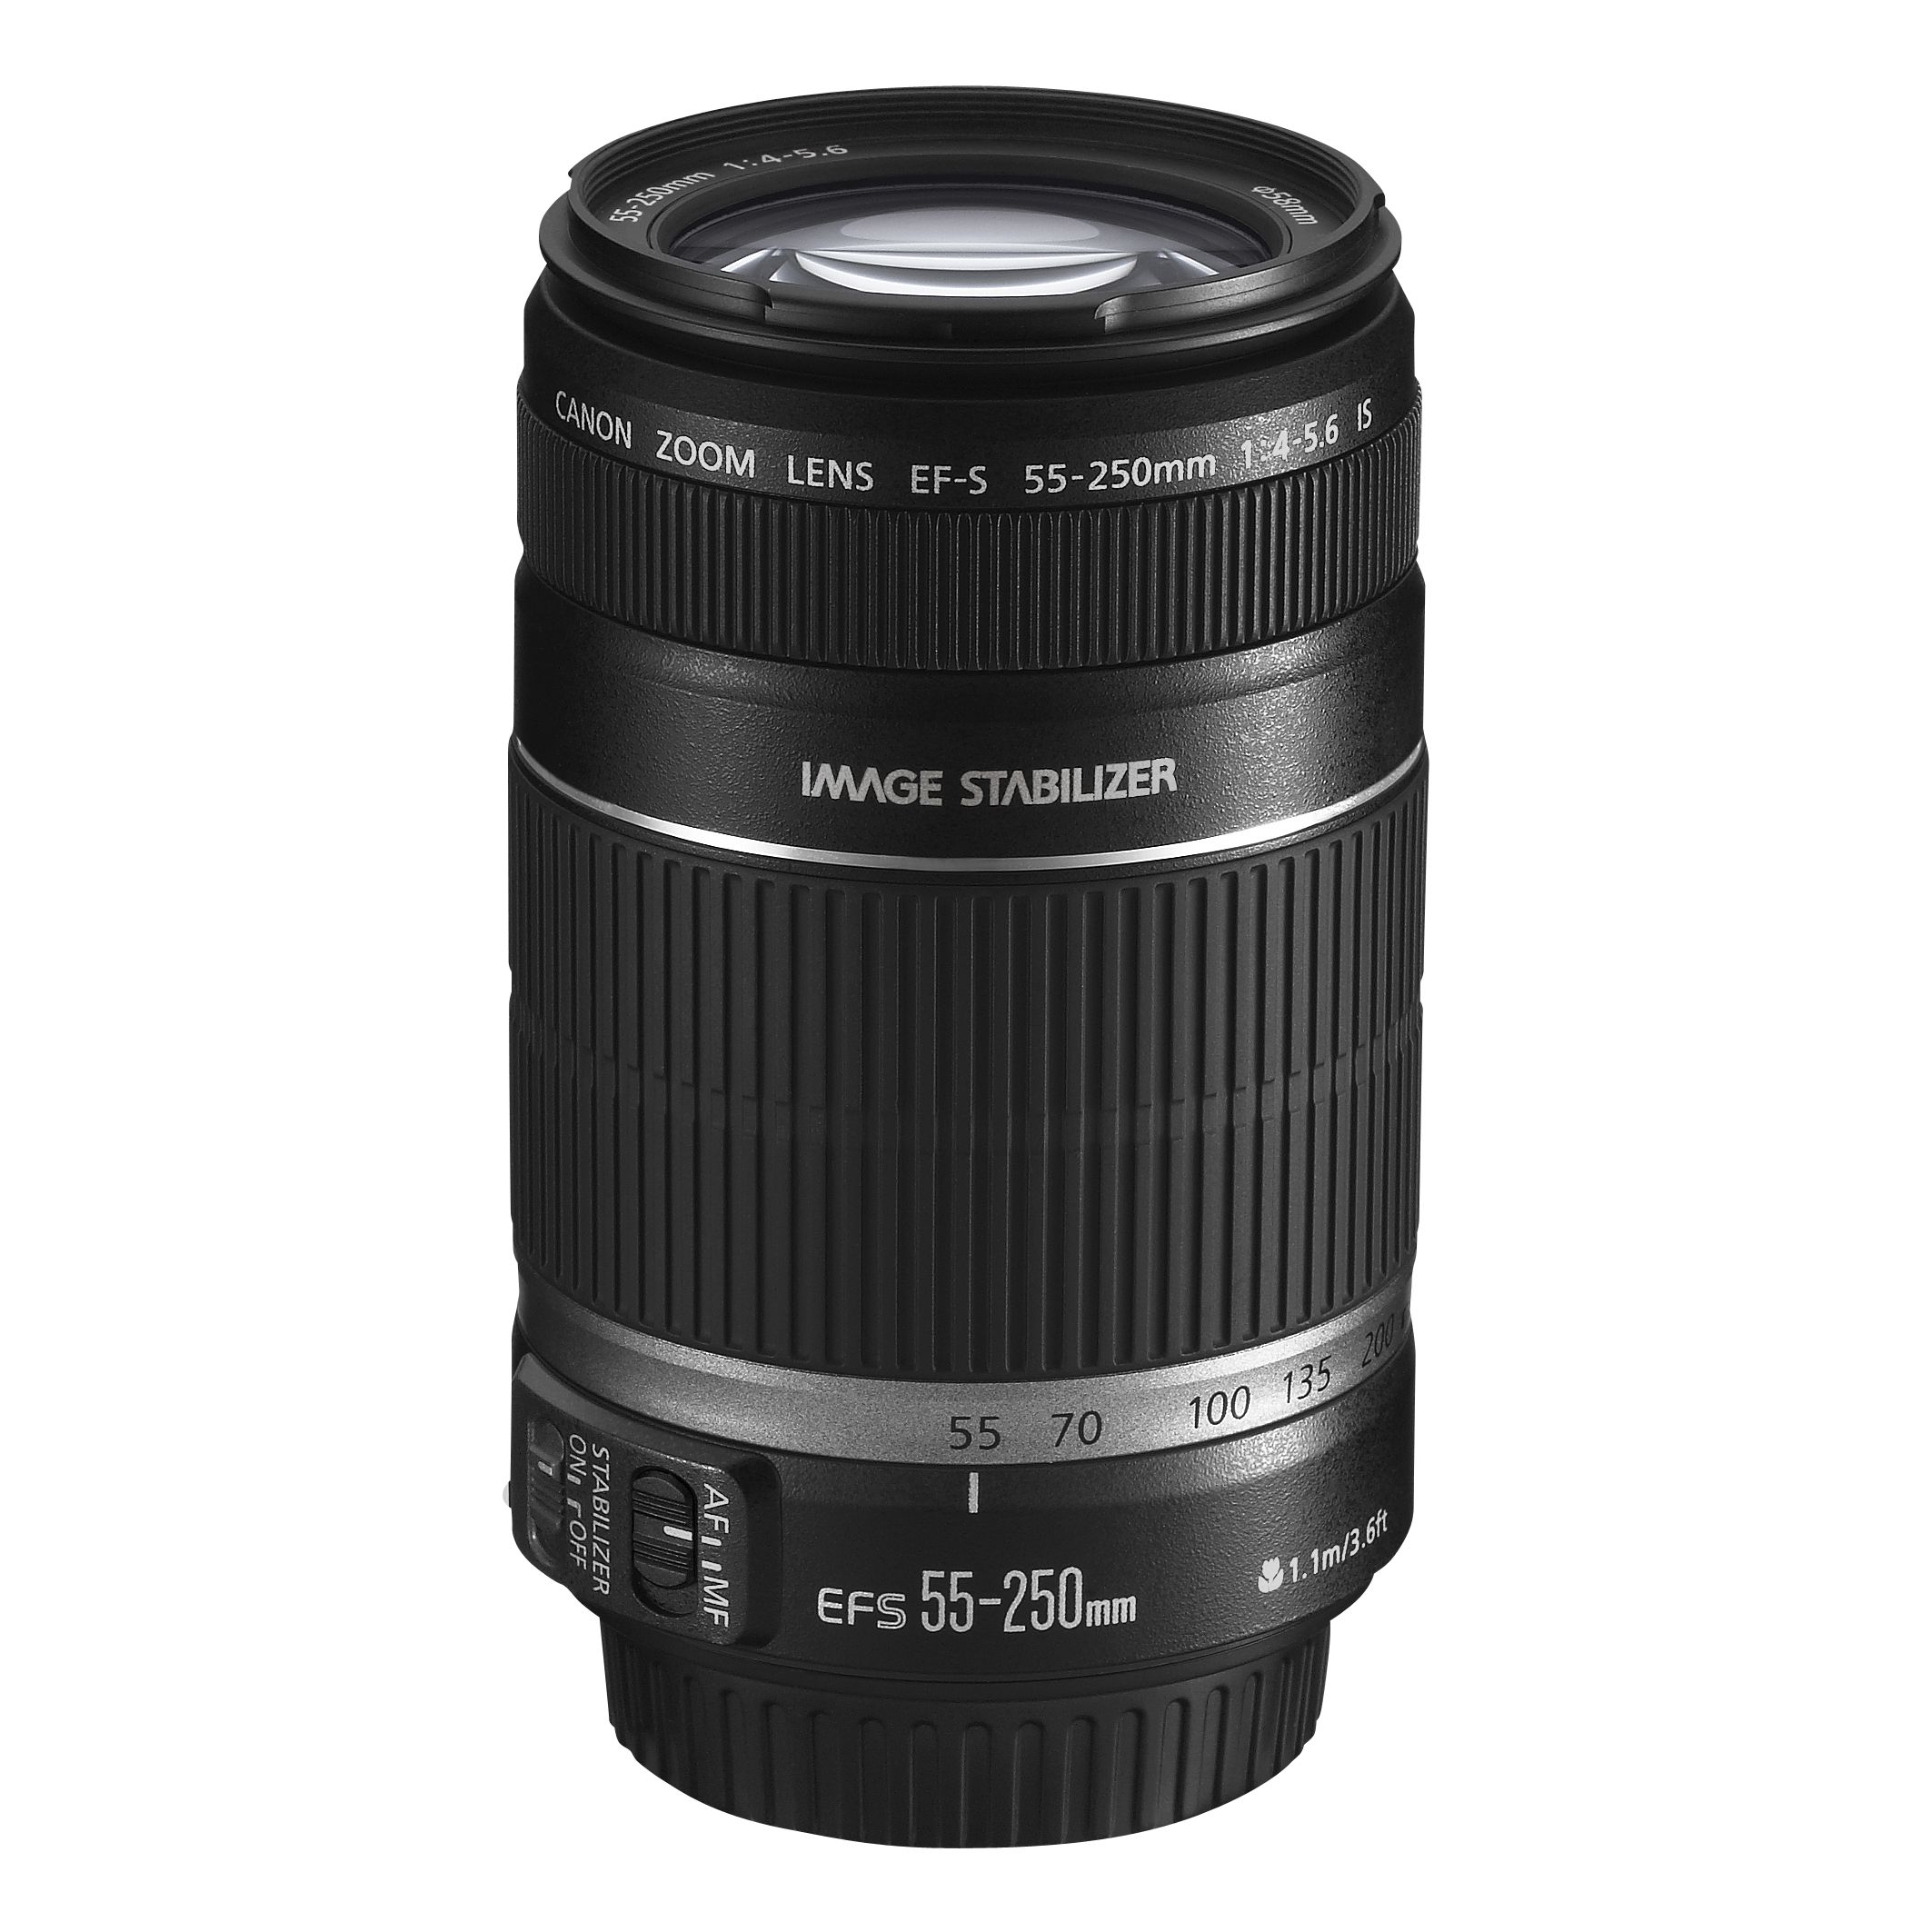 Canon EF-S 55-250mm Lens at JohnLewis